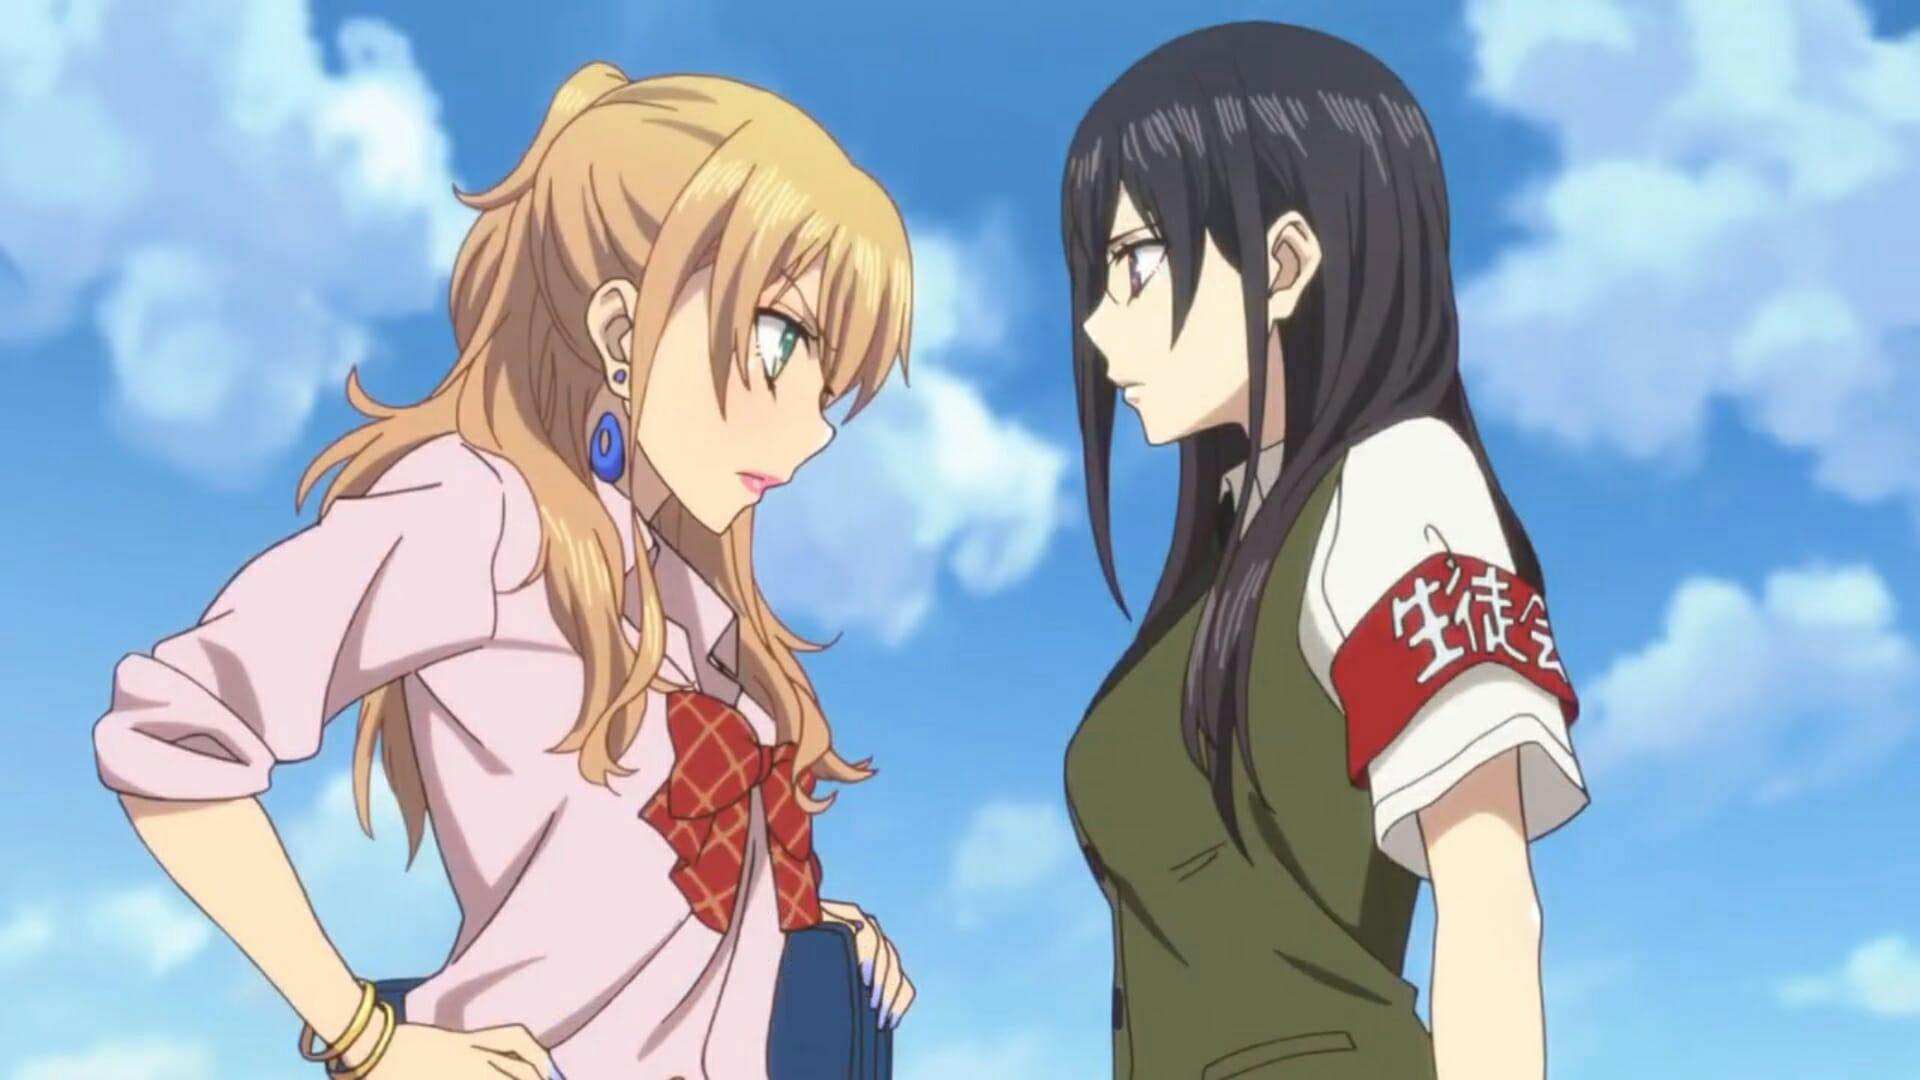 Mei and Yuzu from Citrus, available on Crunchyroll.